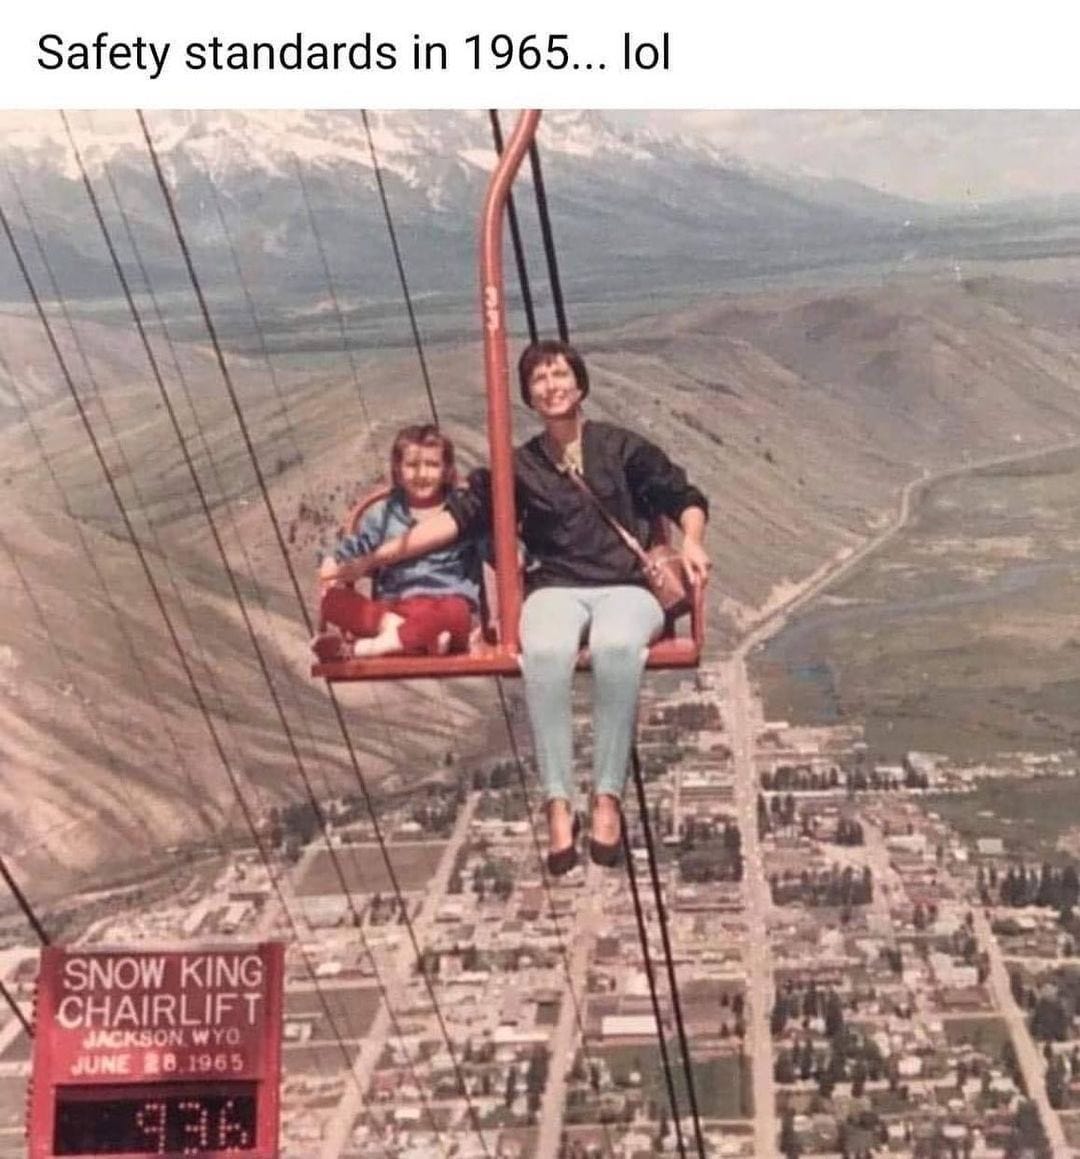 May be an image of 2 people, outdoors and text that says 'Safety standards in 1965... lol SNOW KING CHAIRLIF JACKSON WYO JUNE 28 1965'